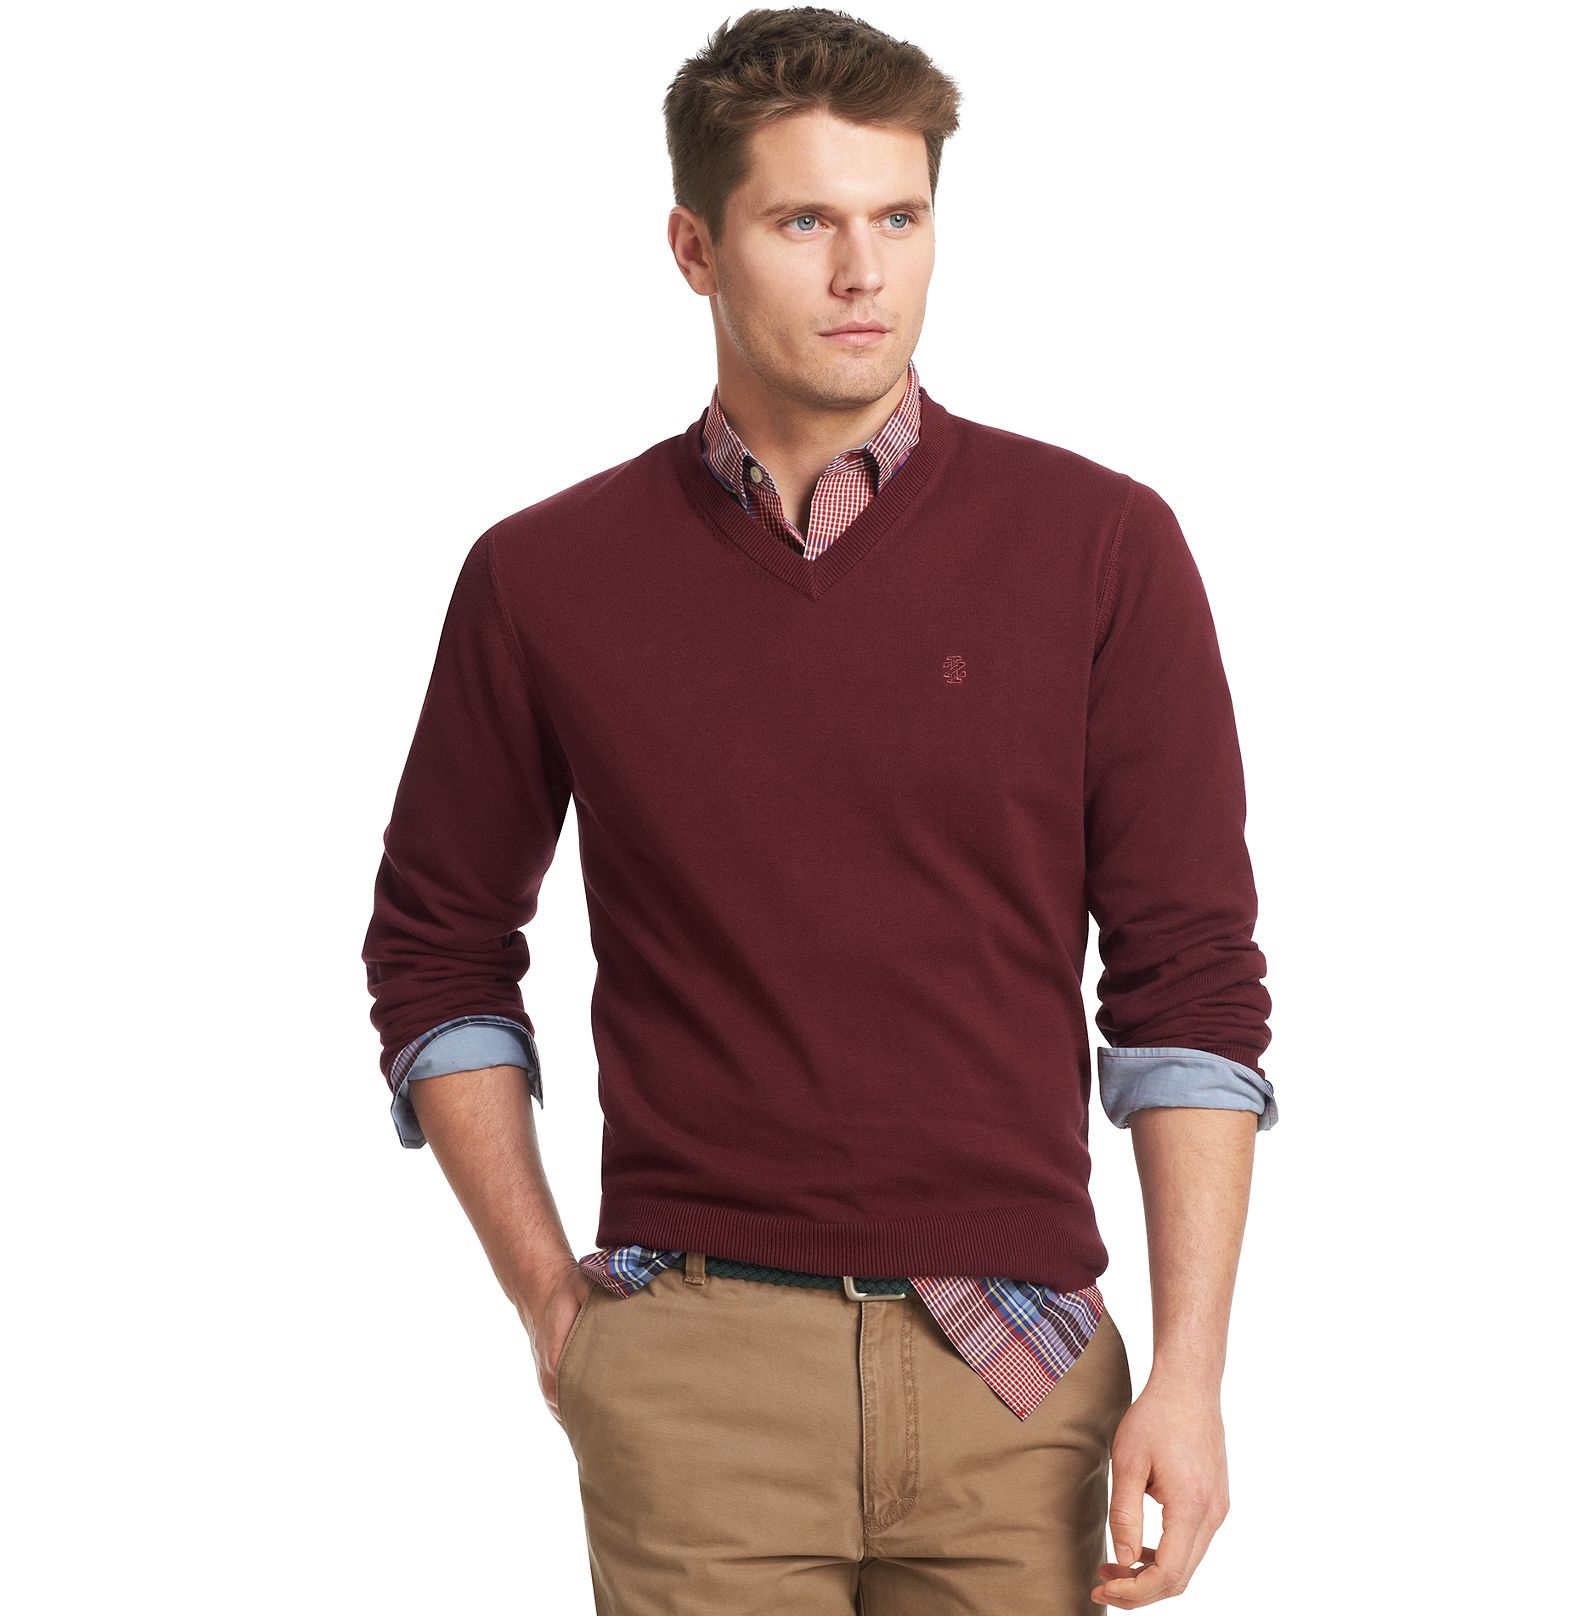 Mens-V-neck-Sweaters-for-Fall-Winter-2013-2014-1